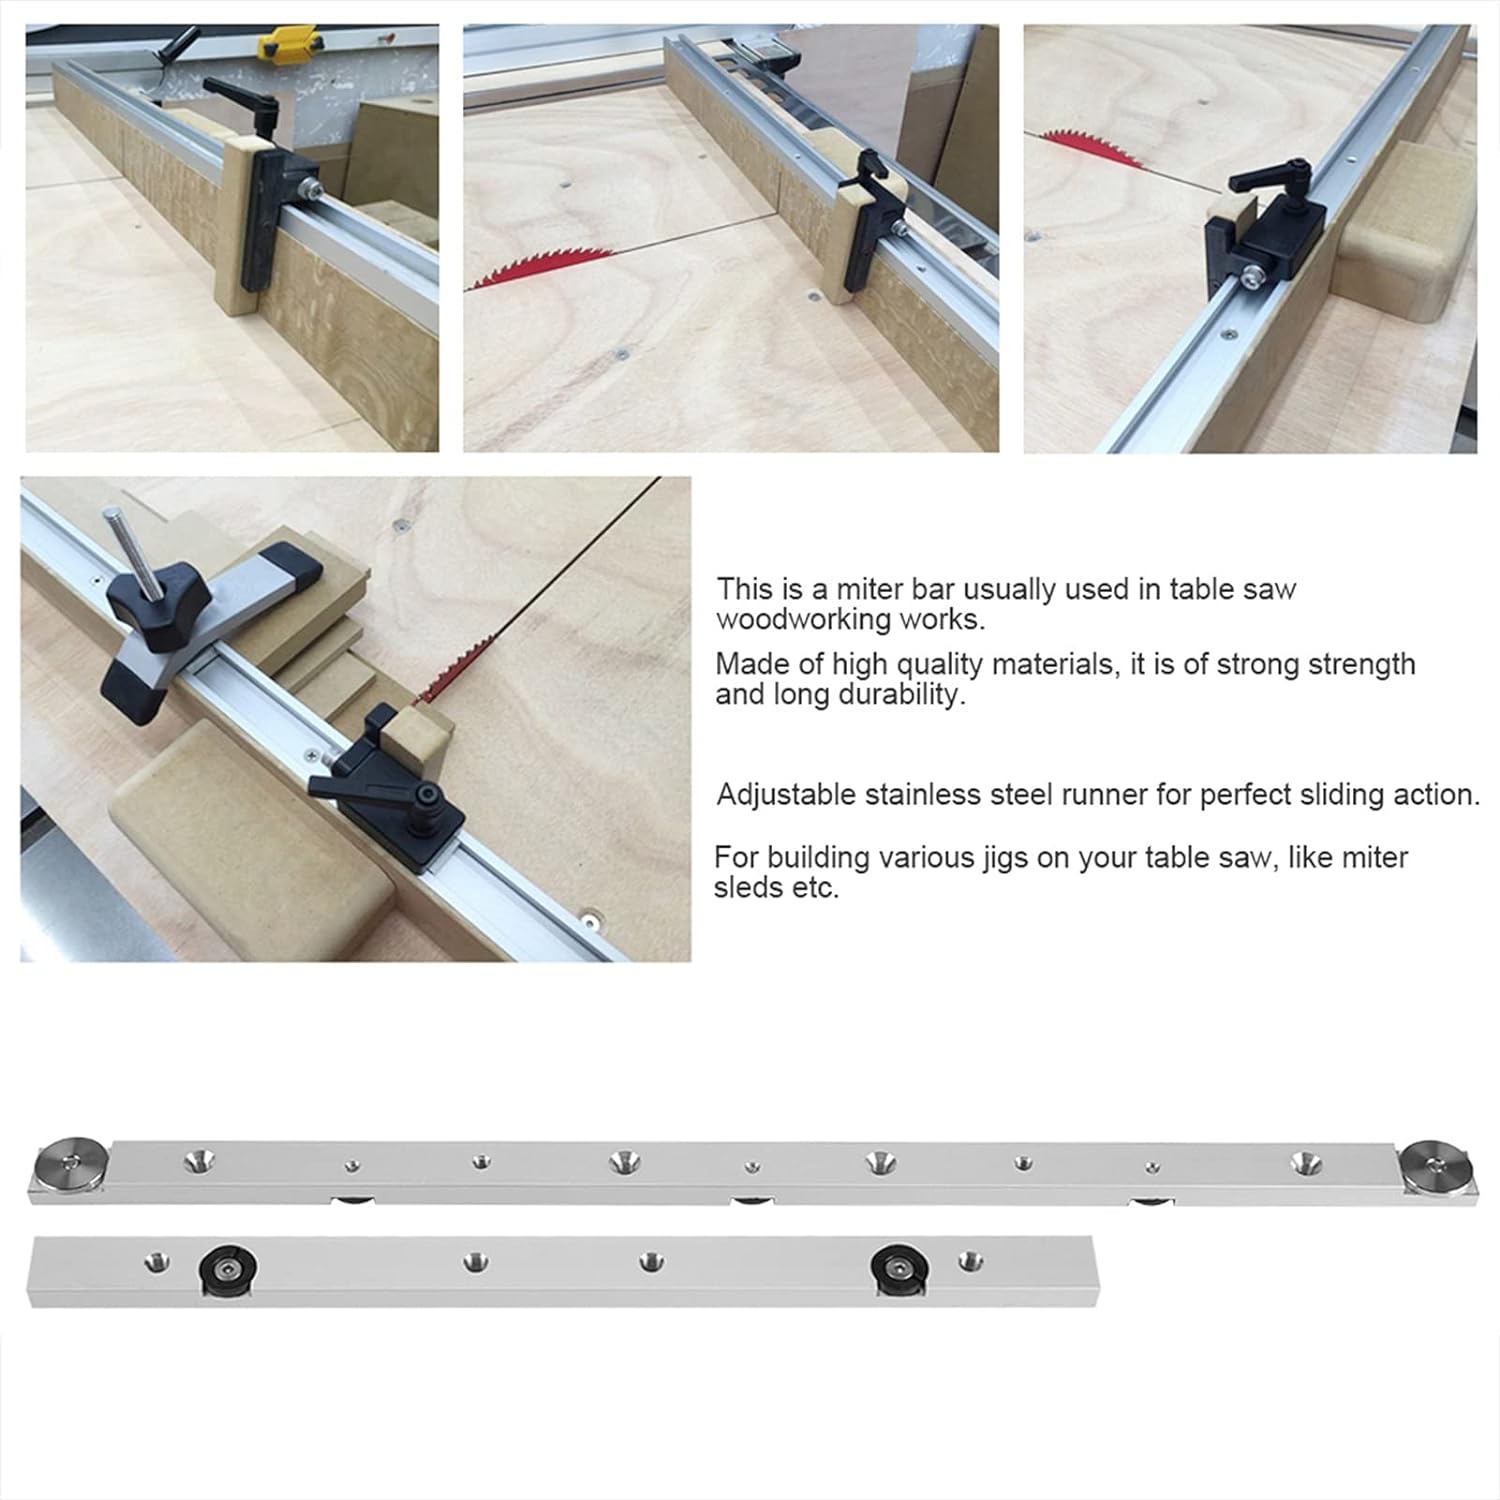 Headerbs Craftsman Table Saw Miter Gauge, Aluminium Alloy Miter Bar Slider Table Saw Gauge Rod Woodworking Tool Durable In Use(450mm / 1